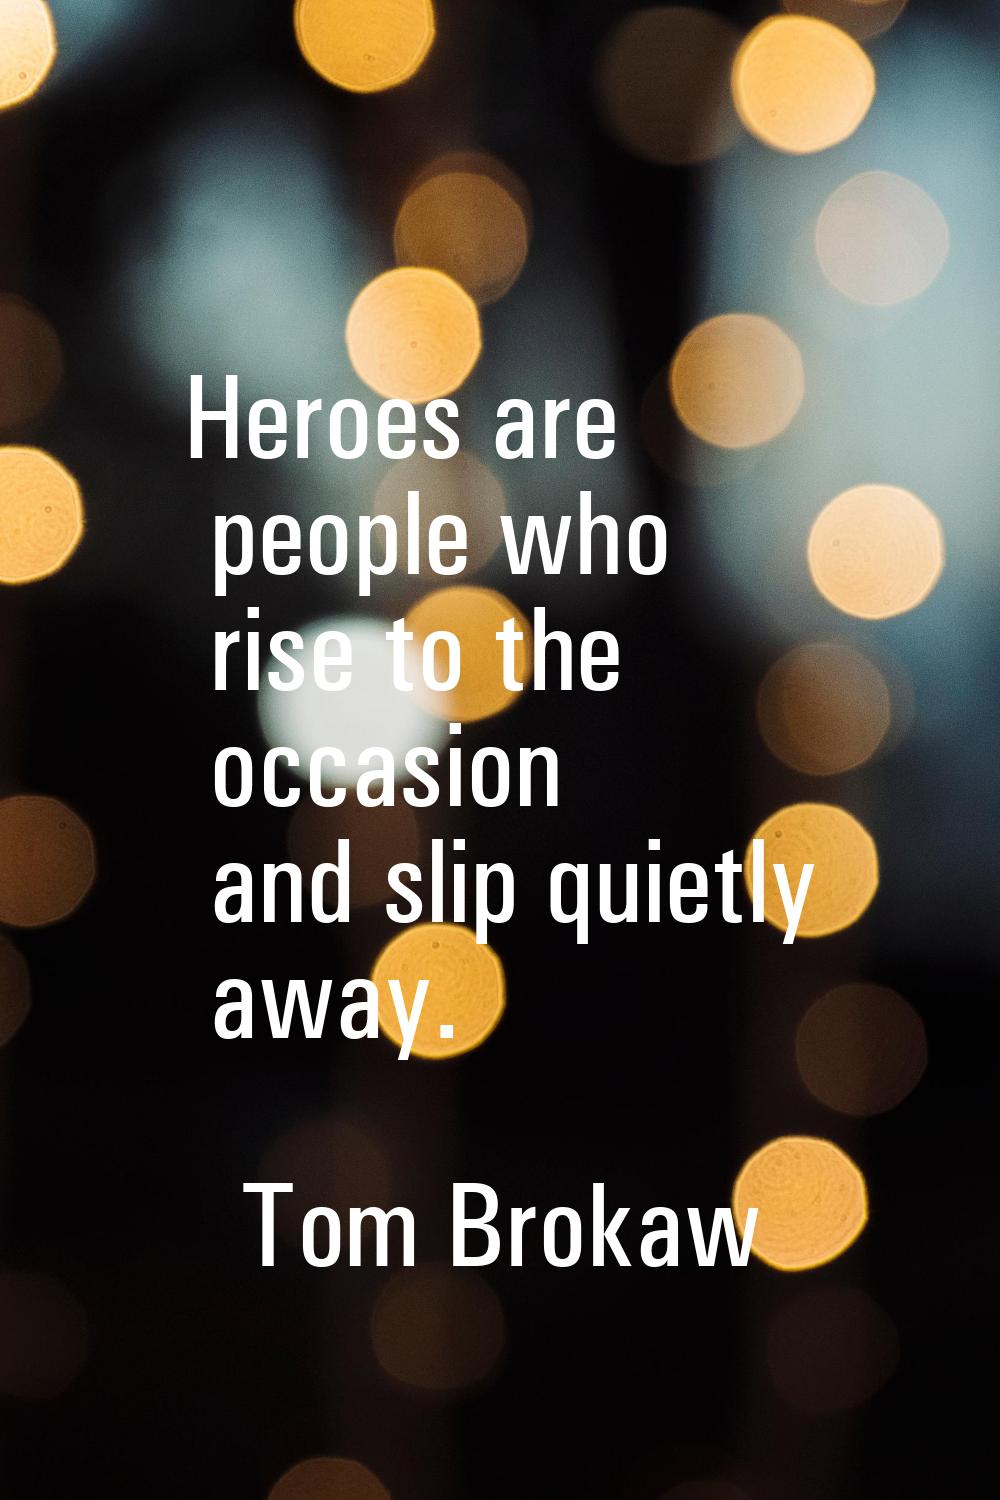 Heroes are people who rise to the occasion and slip quietly away.